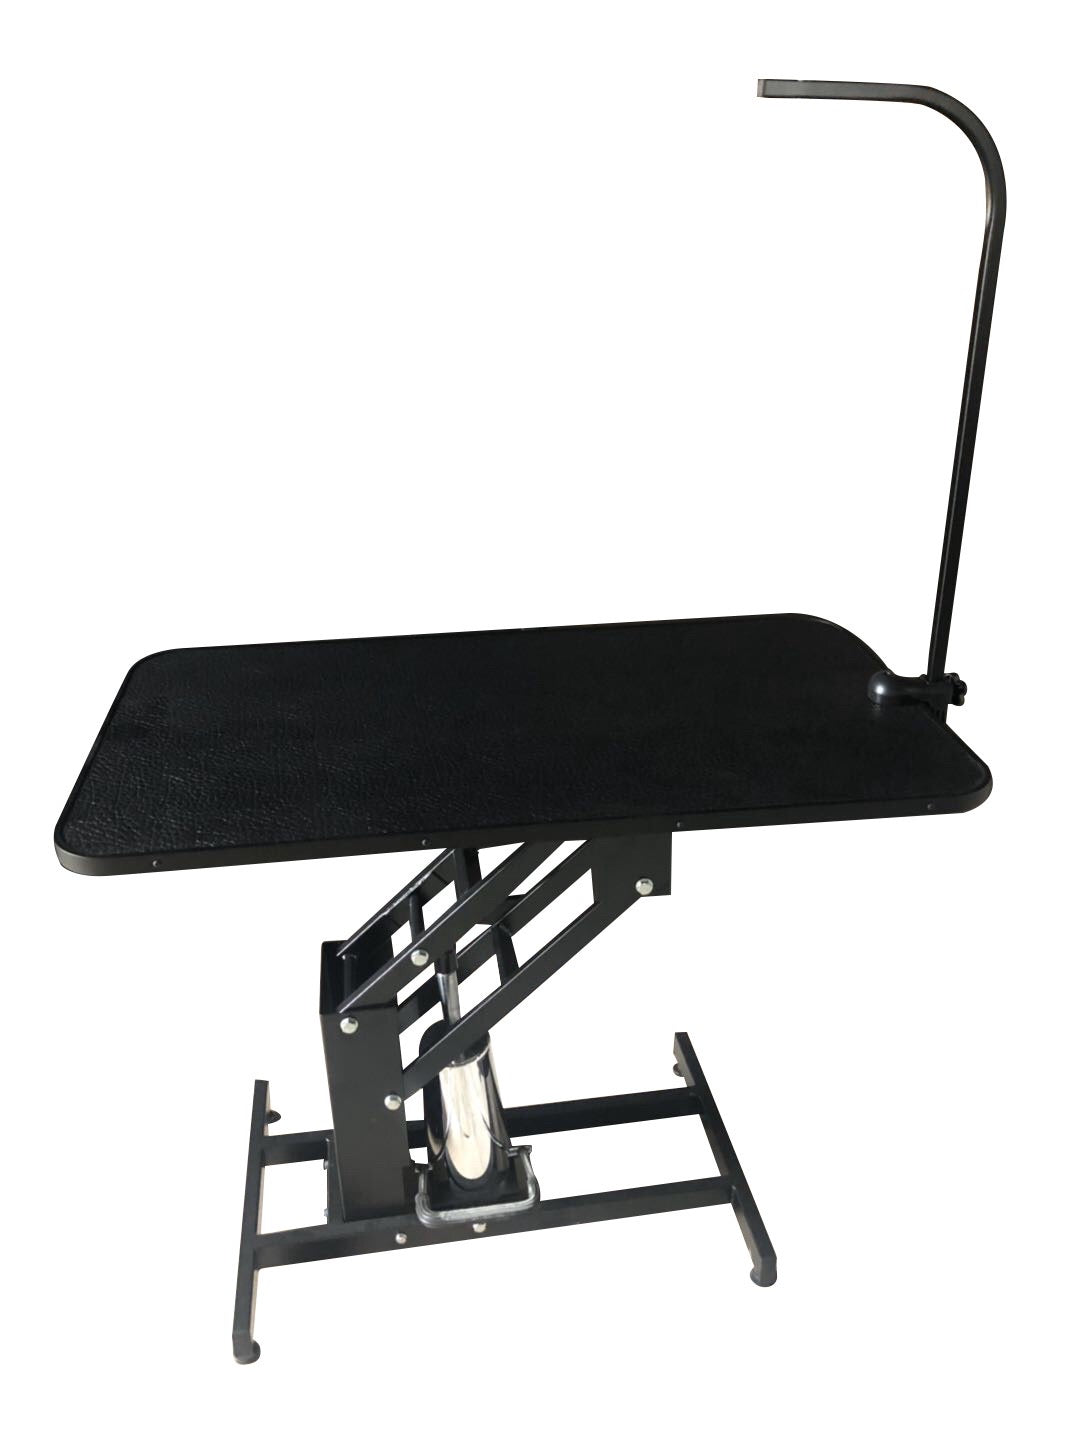 Z-Lift Hydraulic Grooming Table